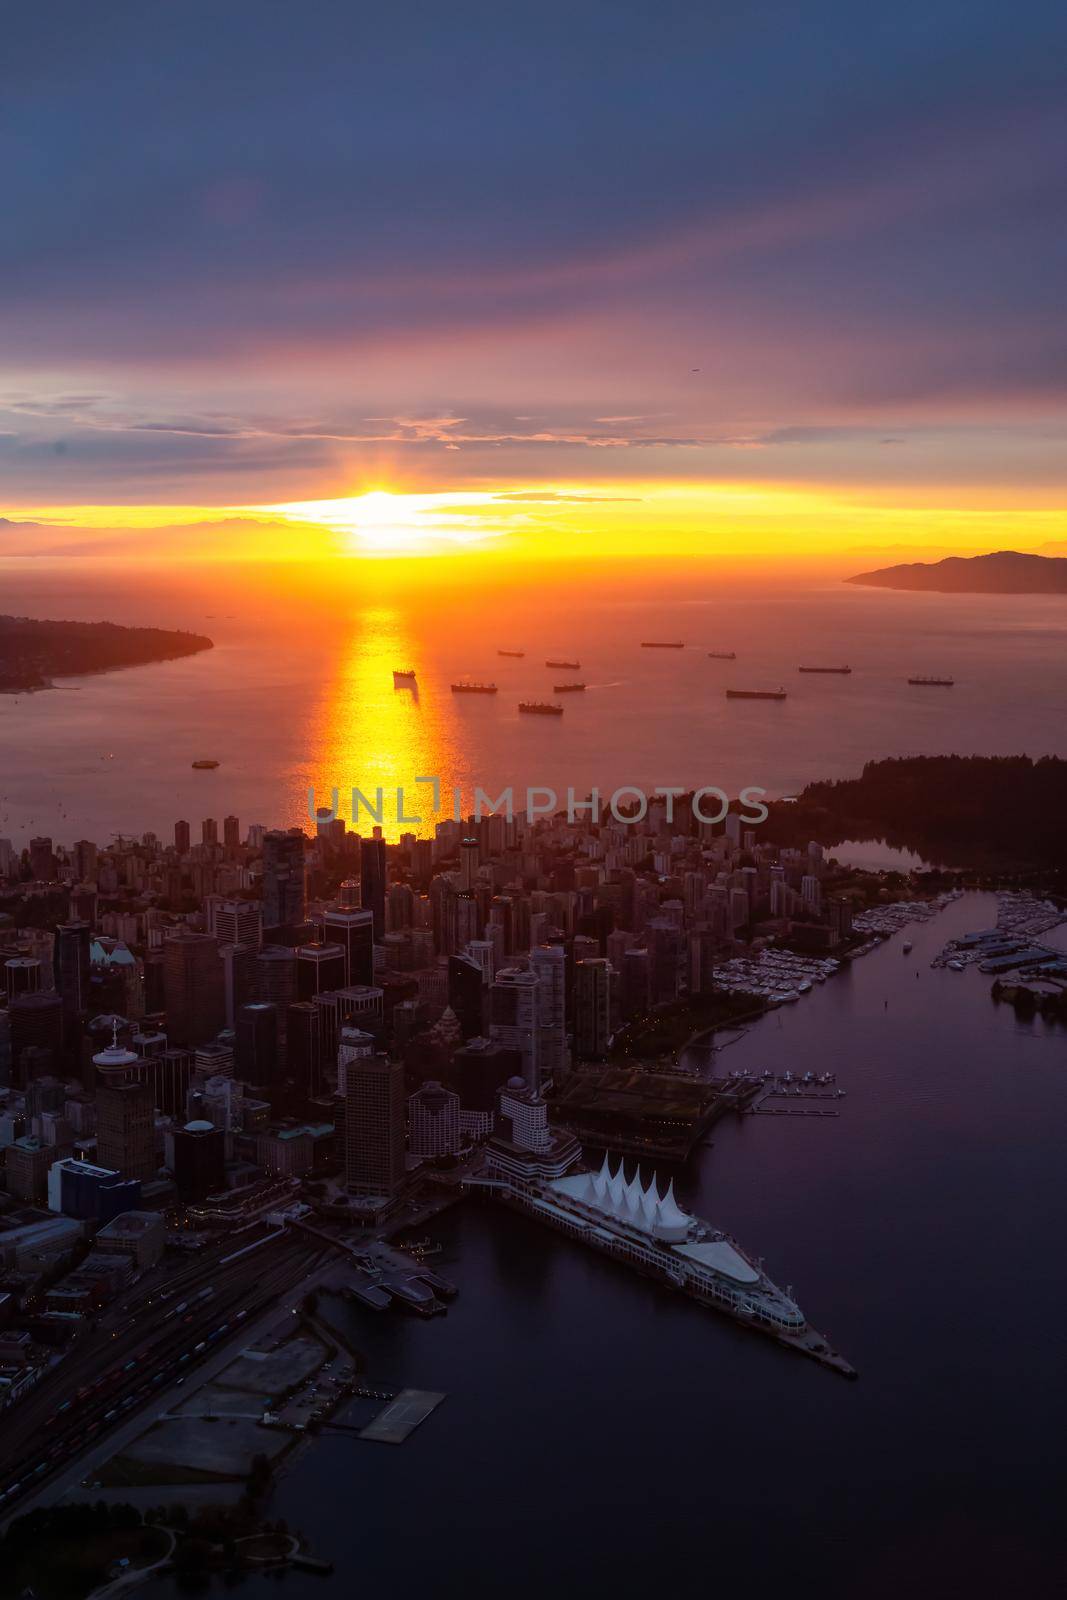 Aerial view of Downtown City during a striking and dramatic sunset. Taken in Vancouver, British Columbia, Canada.